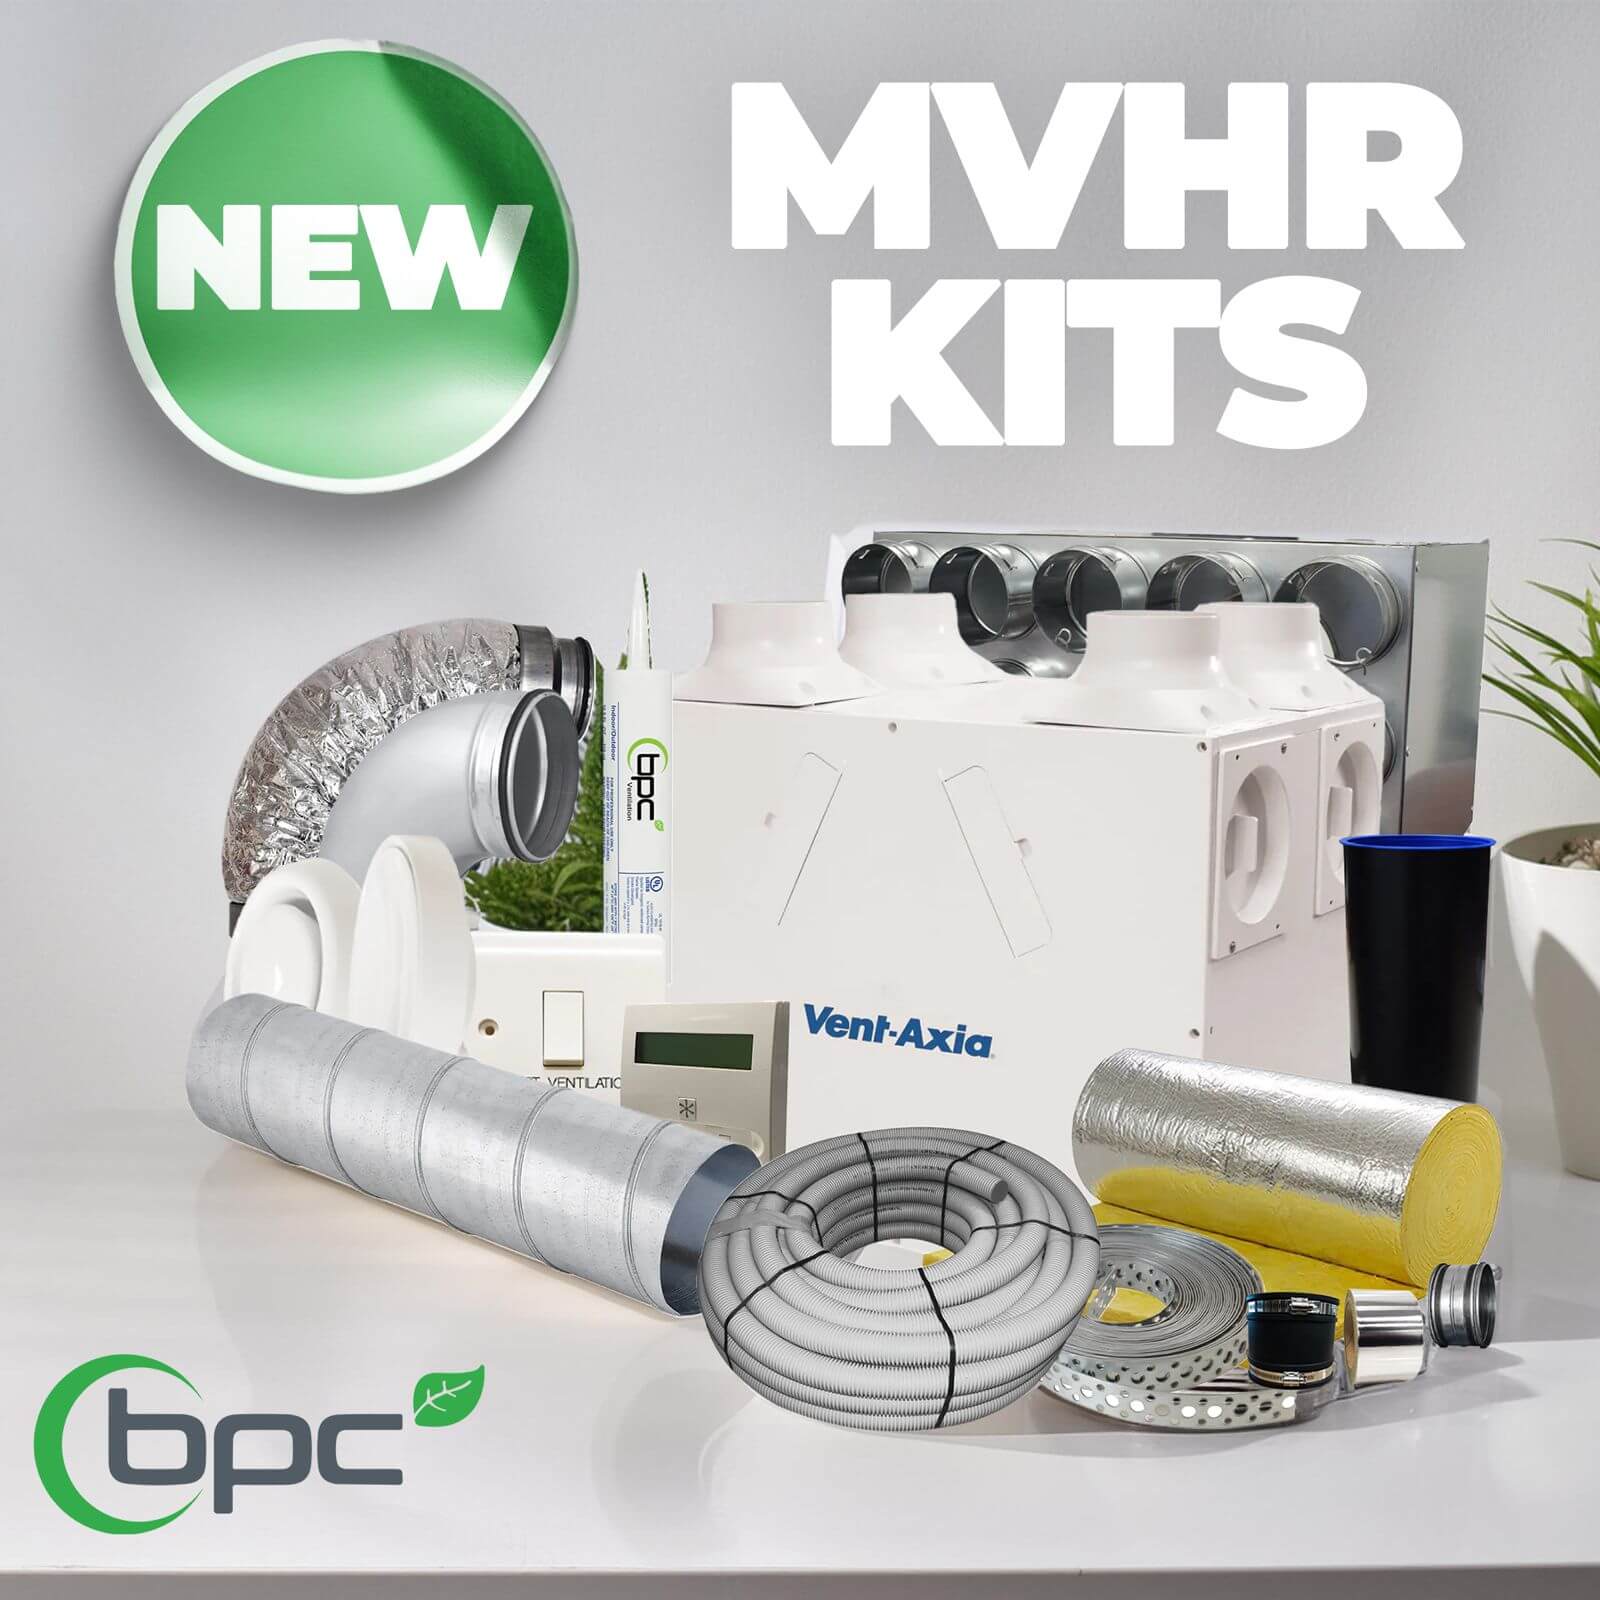 Introducing Our New Range of MVHR Kits